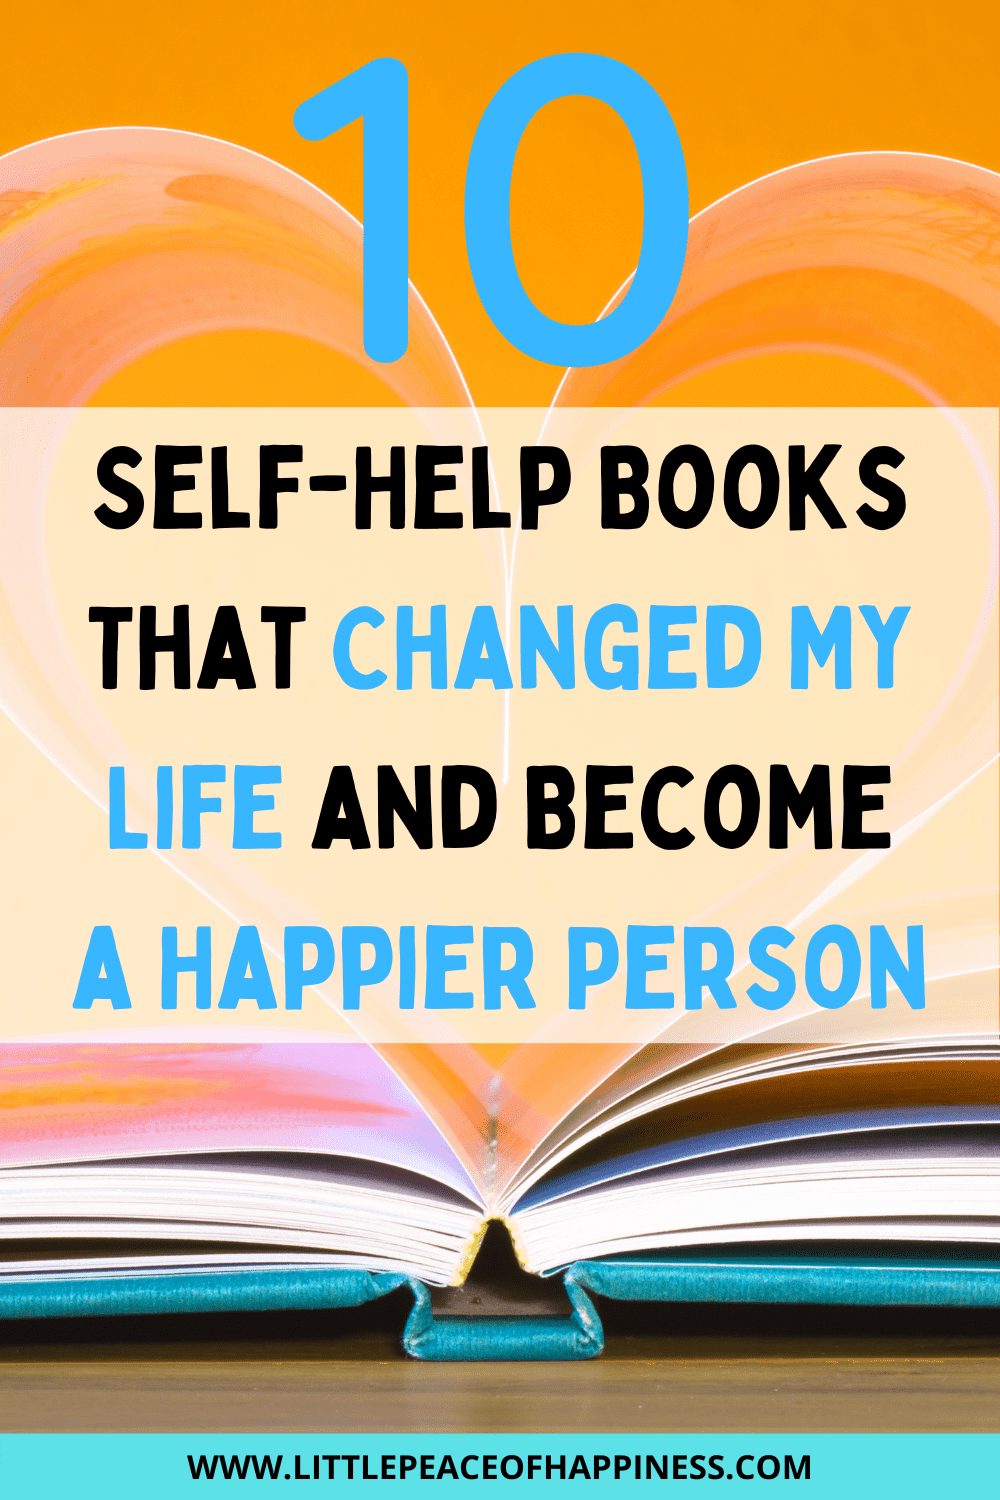 Blog post to Self-Help Books to be Happy